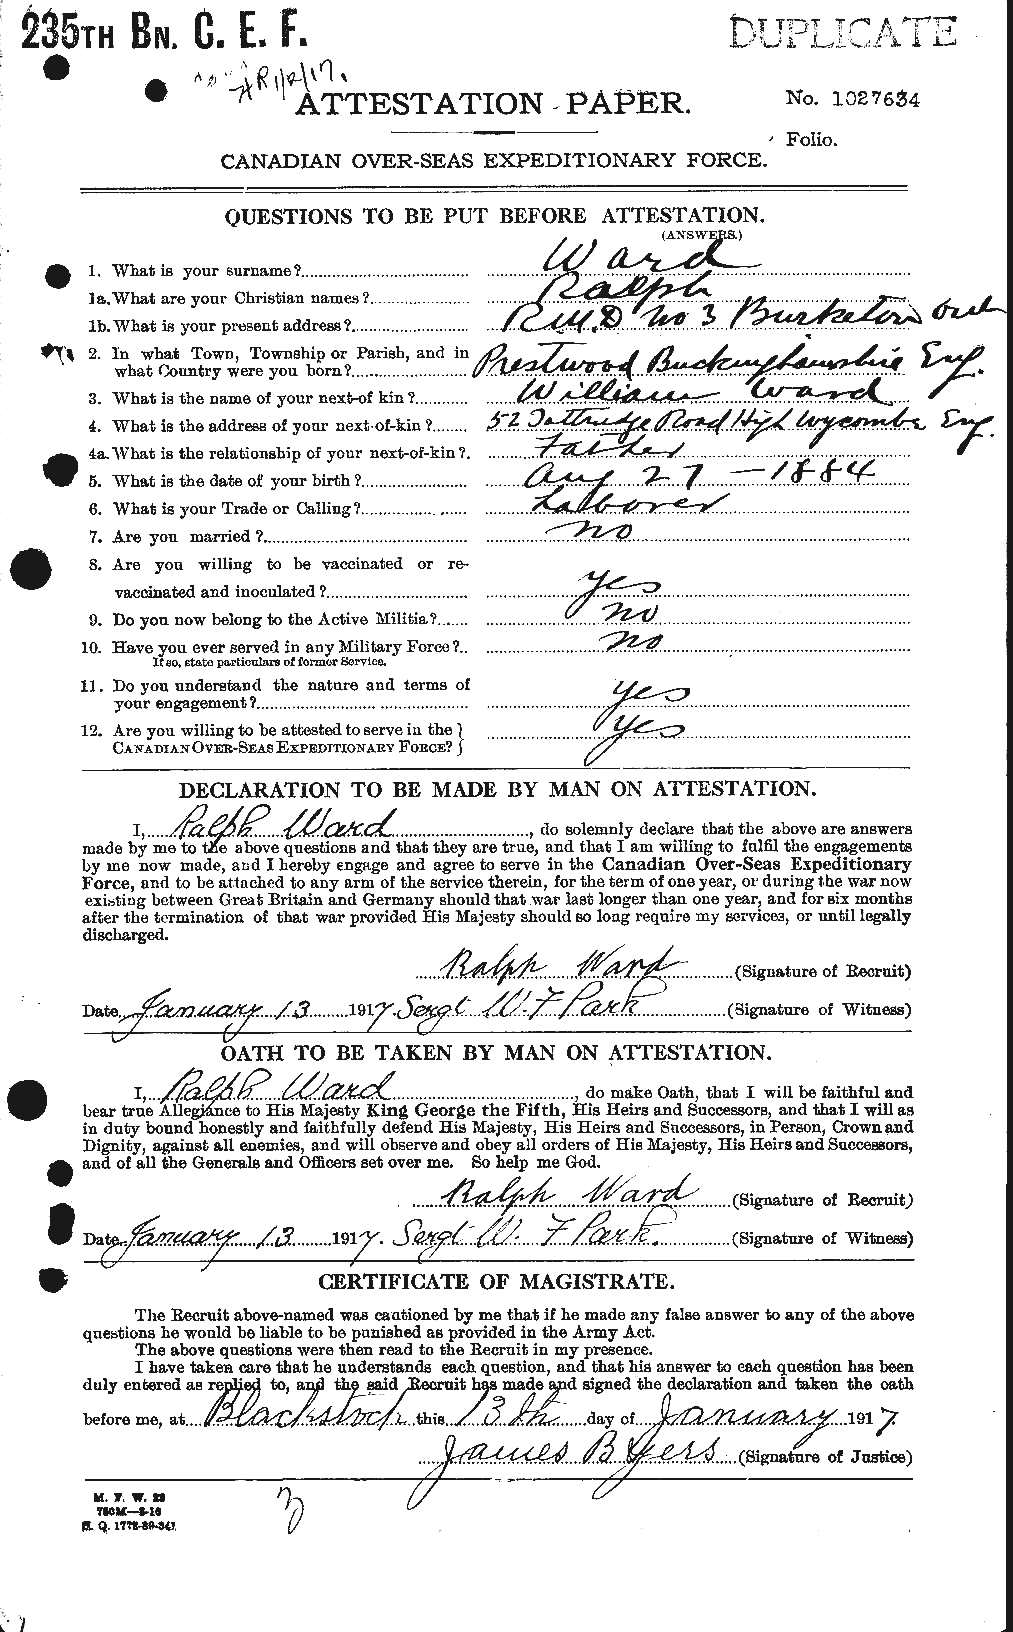 Personnel Records of the First World War - CEF 659632a